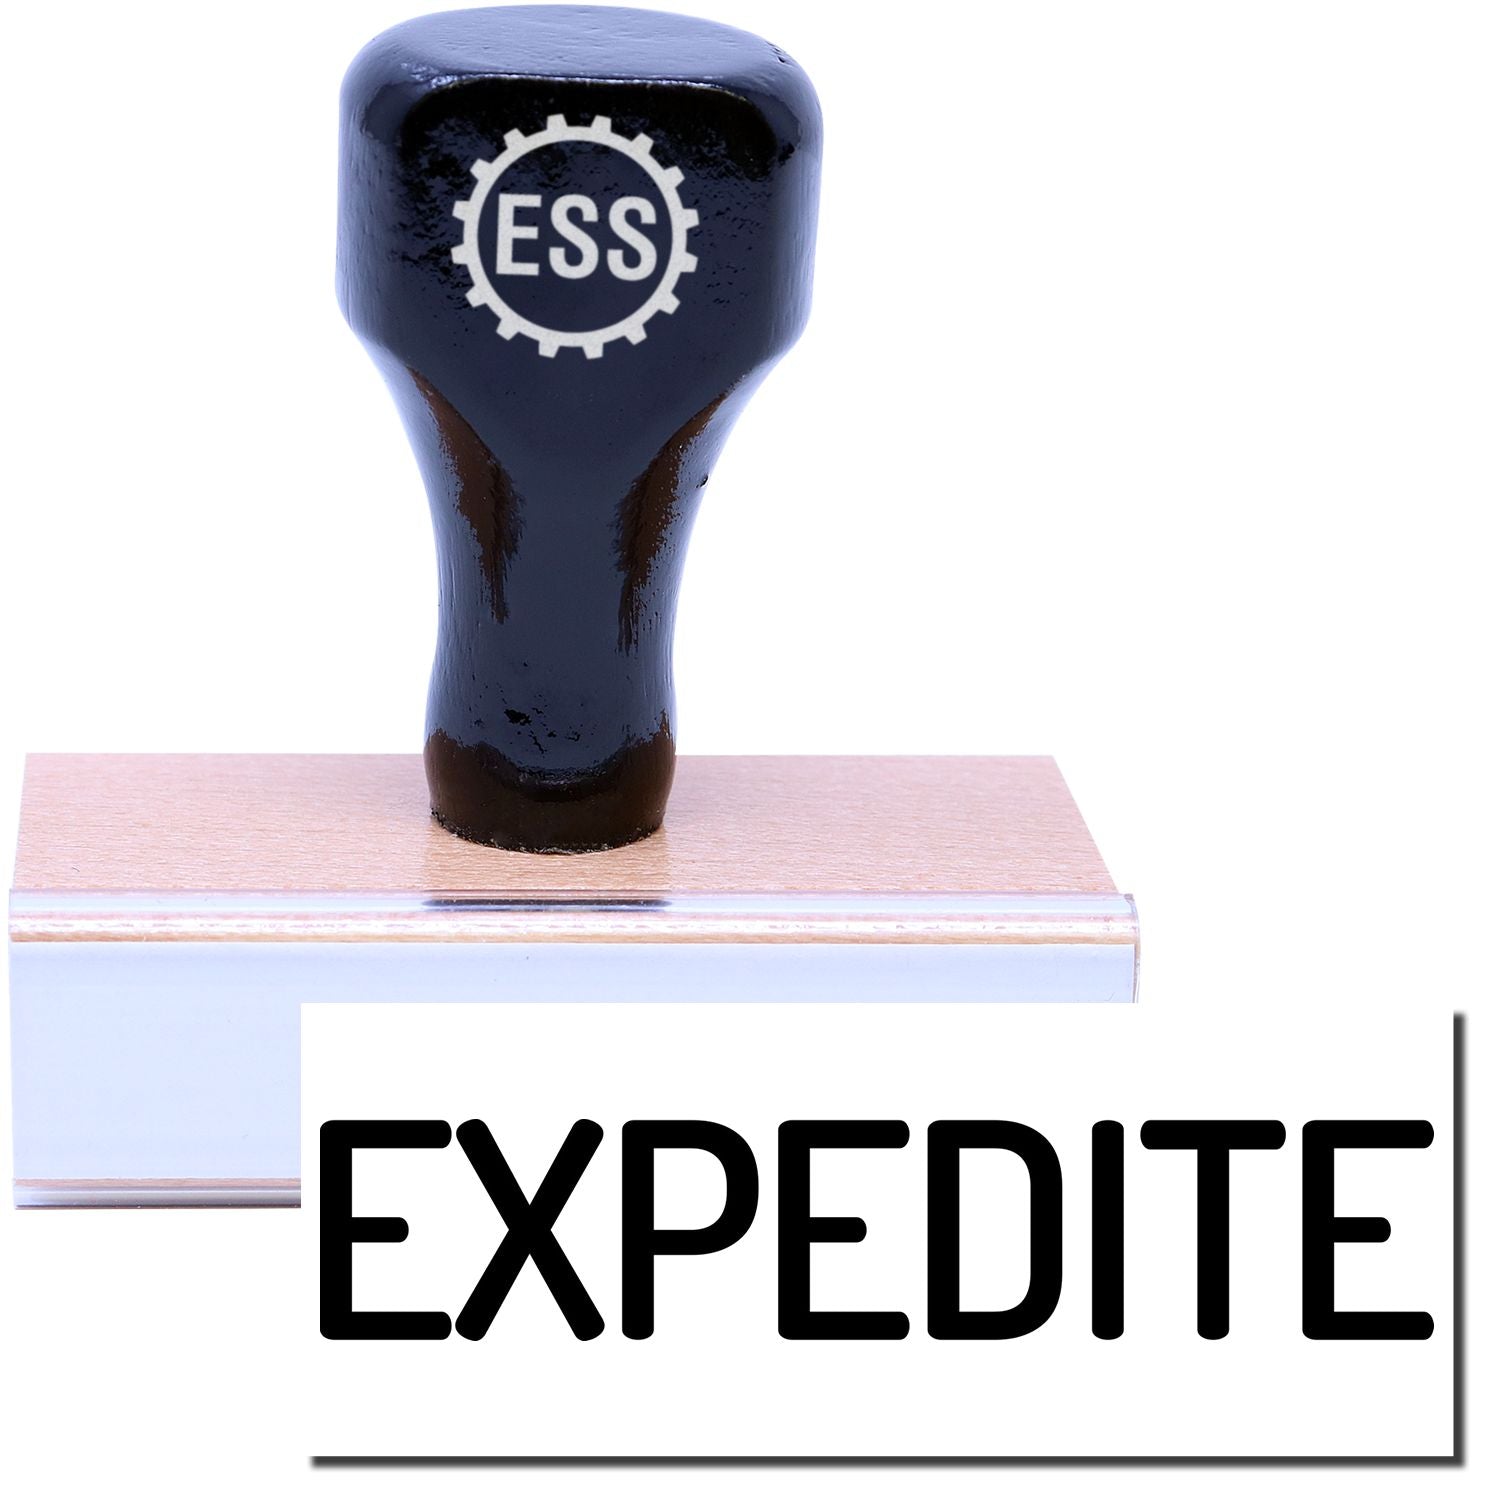 A stock office rubber stamp with a stamped image showing how the text "EXPEDITE" in a large narrow font is displayed after stamping.